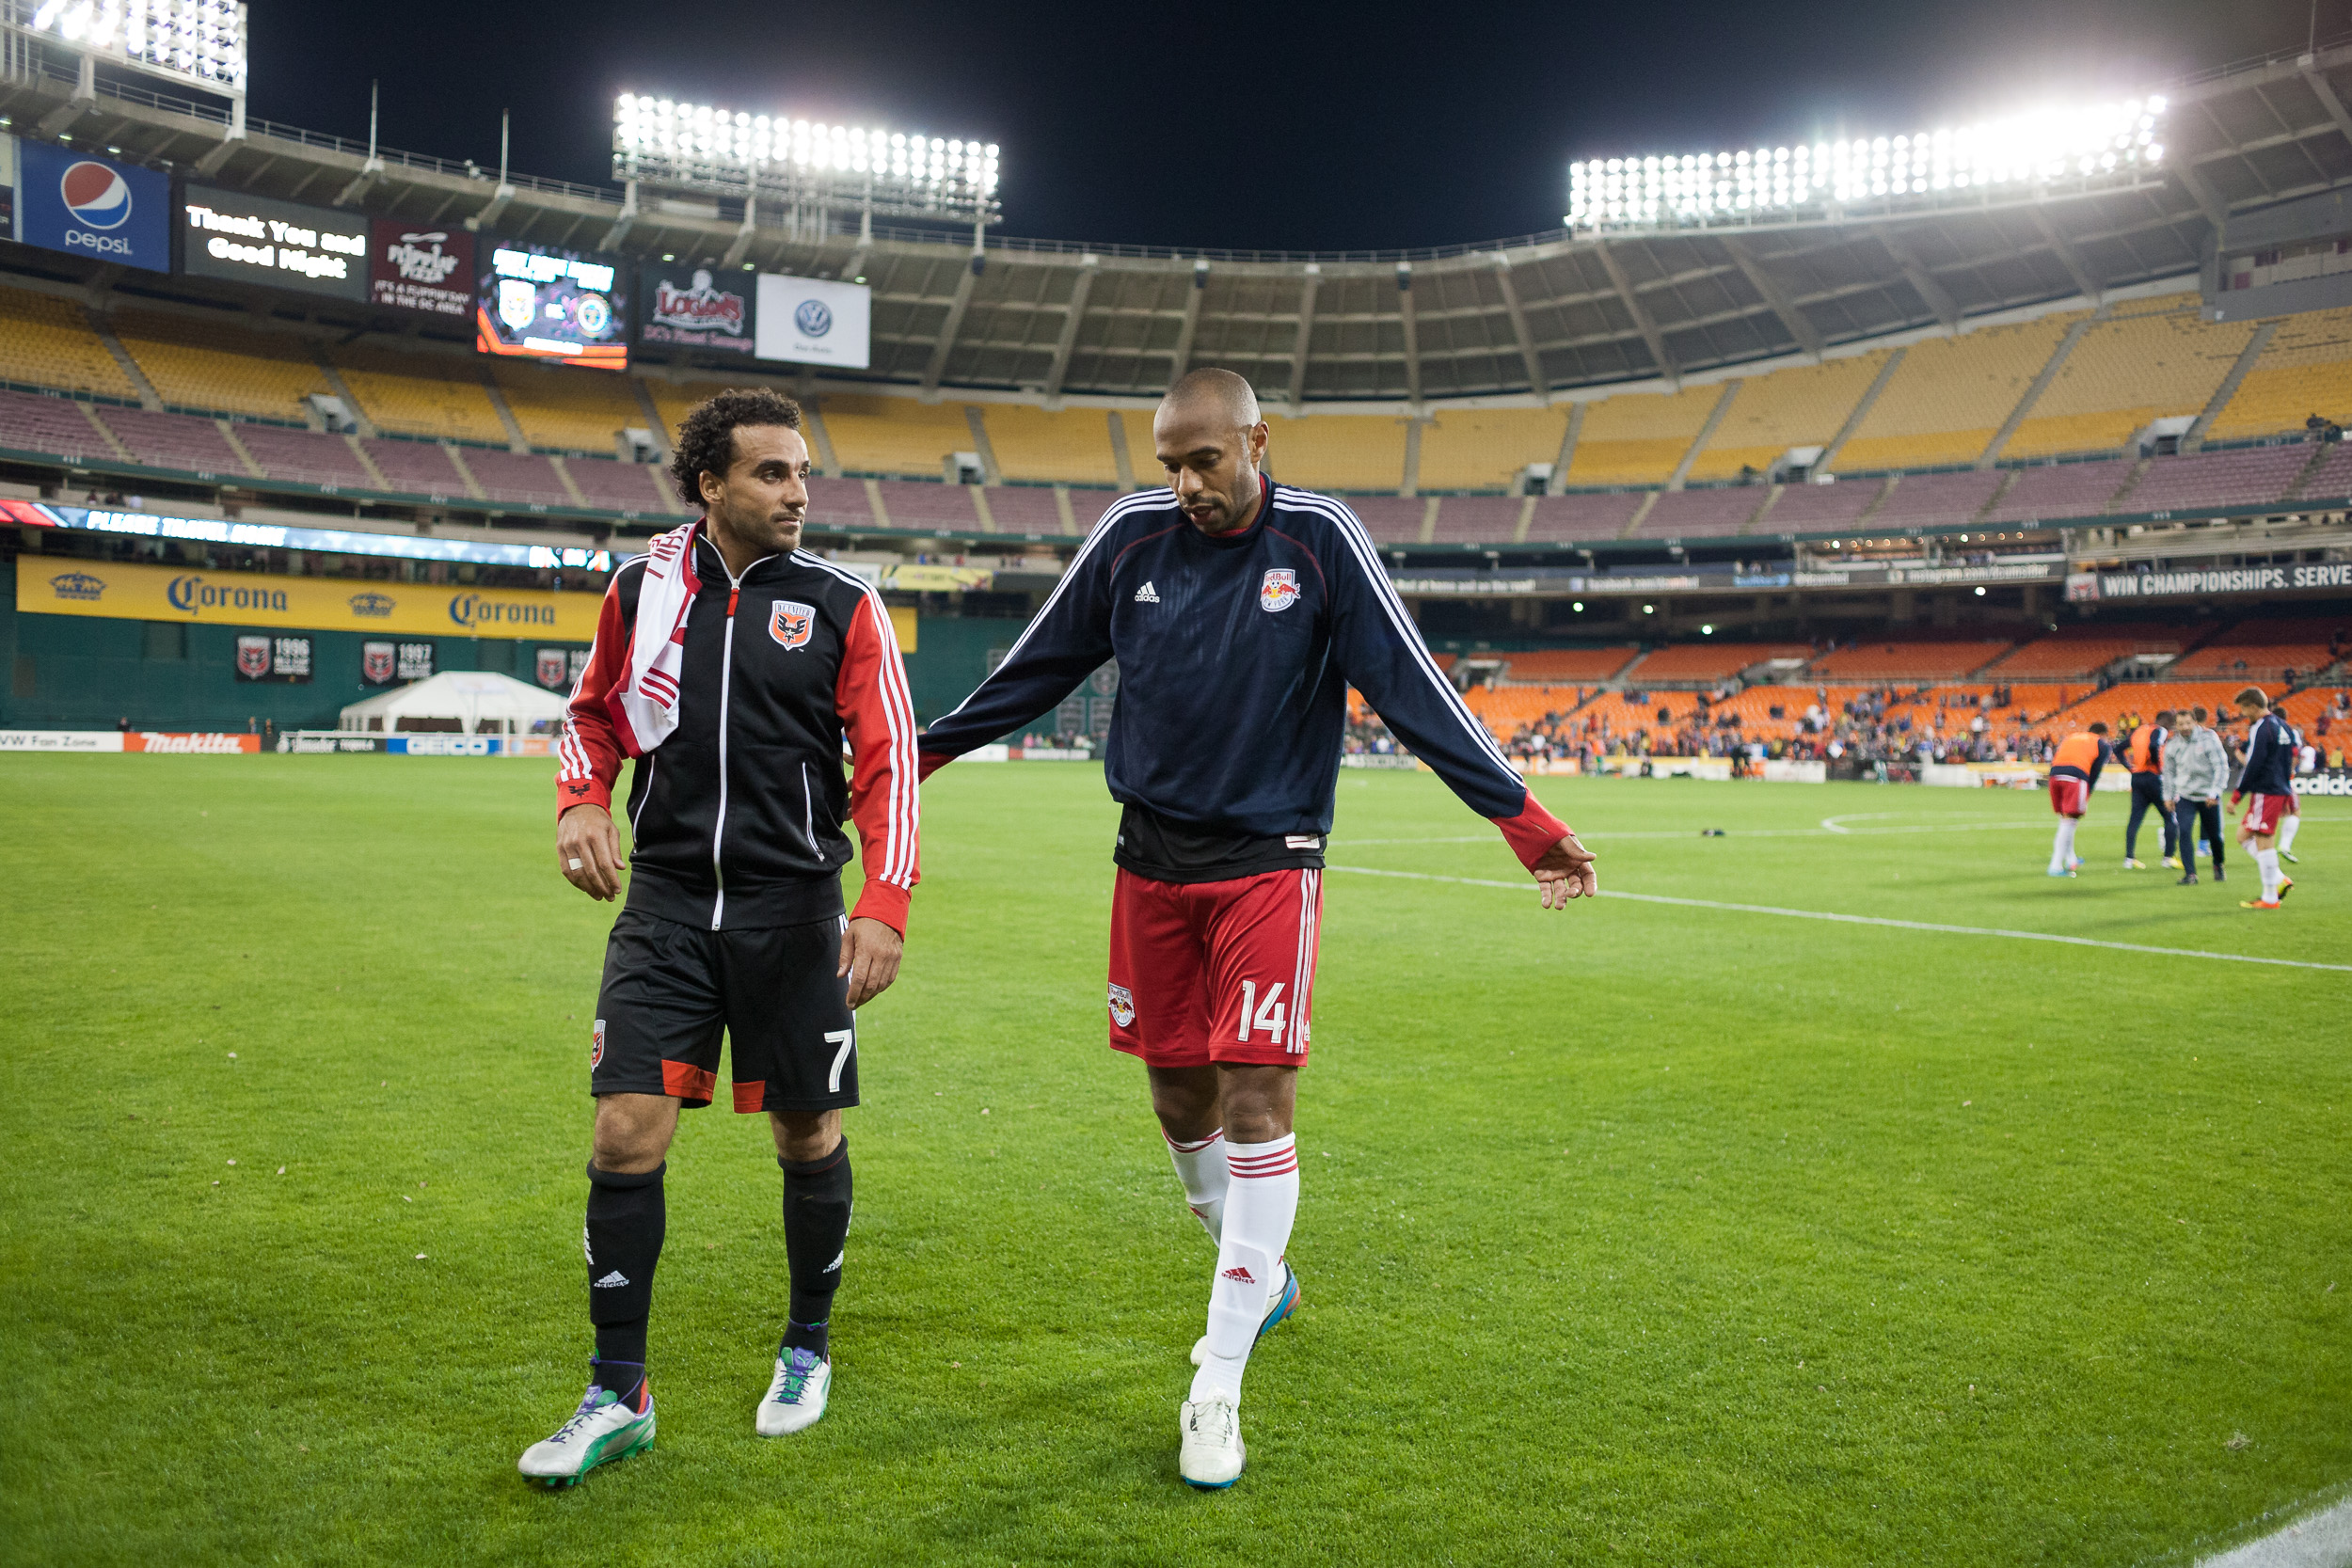 Dwayne De Rosario (7) and Thierry Henry